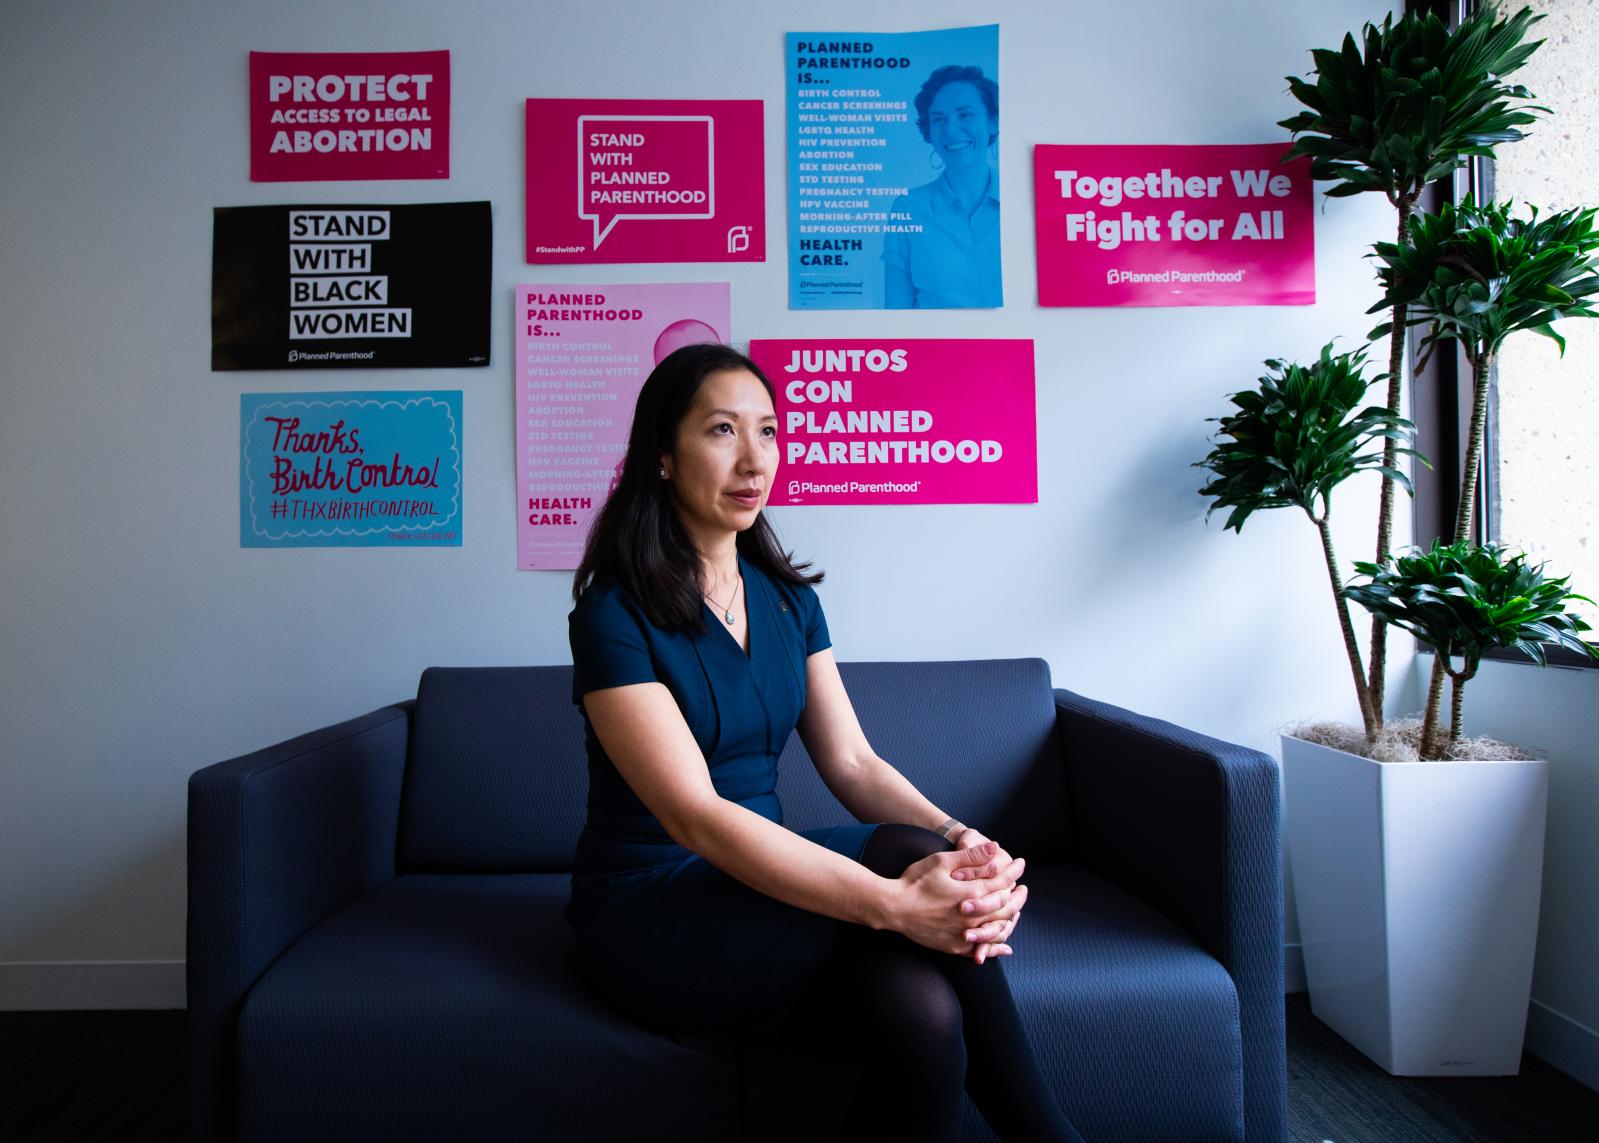 WASHINGTON DC, DECEMBER 14th: Dr. Leana Sheryle Wen, President of the Planned Parenthood Federation of America, poses for a portrait at the organization’s office located in downtown Washington DC. Dr. Wen is the first female physician to become a president of Planned Parenthood in fifty years. Photo by Eman Mohammed for Buzzfeed News 